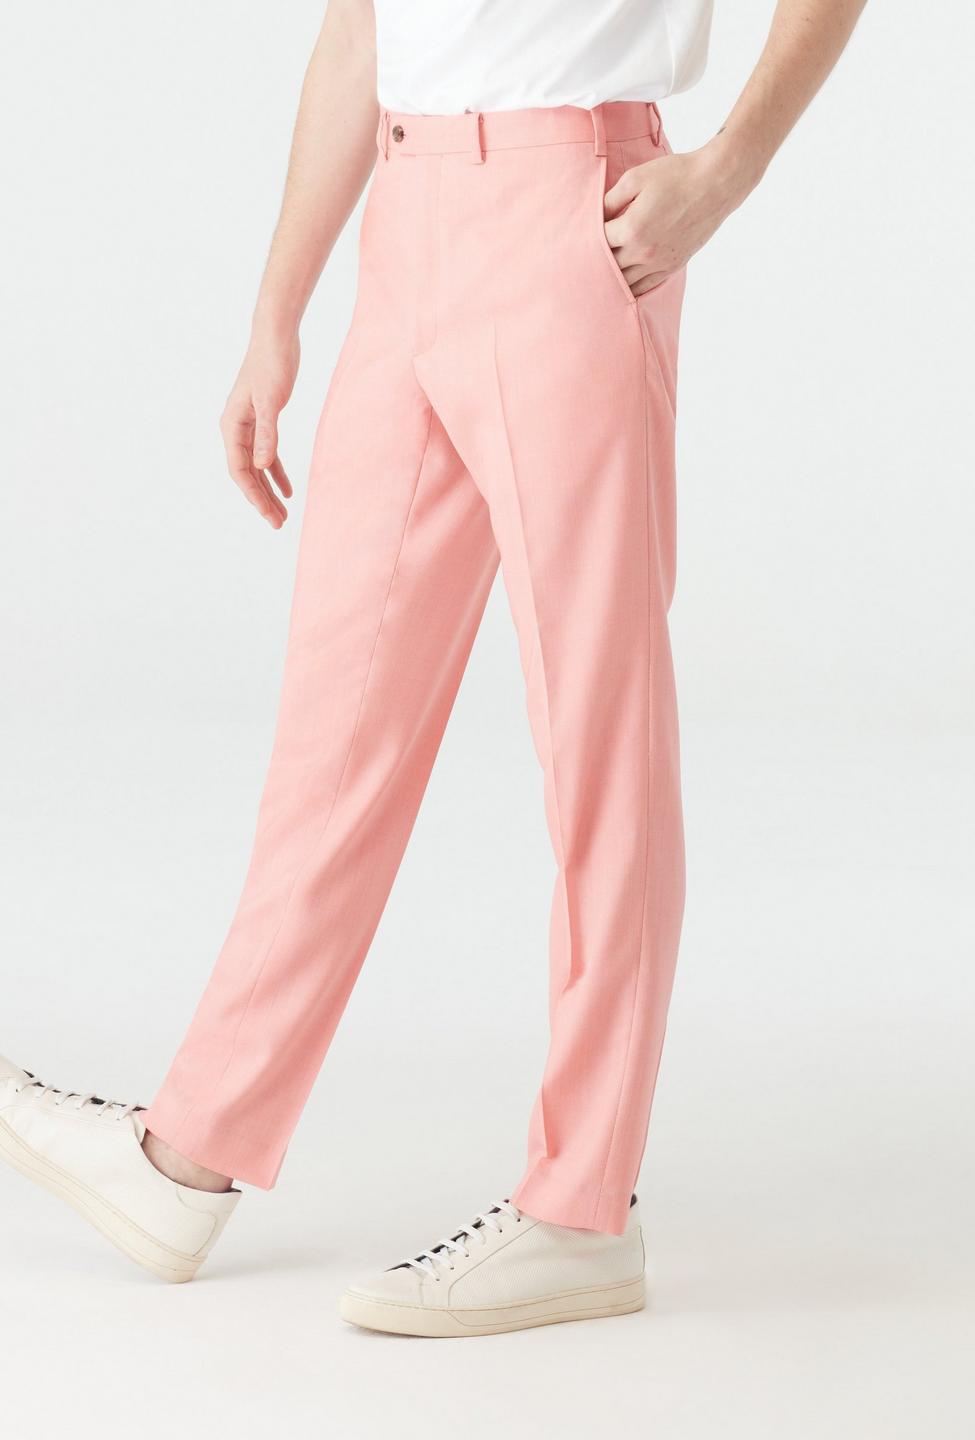 Pink pants - Solid Design from Seasonal Indochino Collection